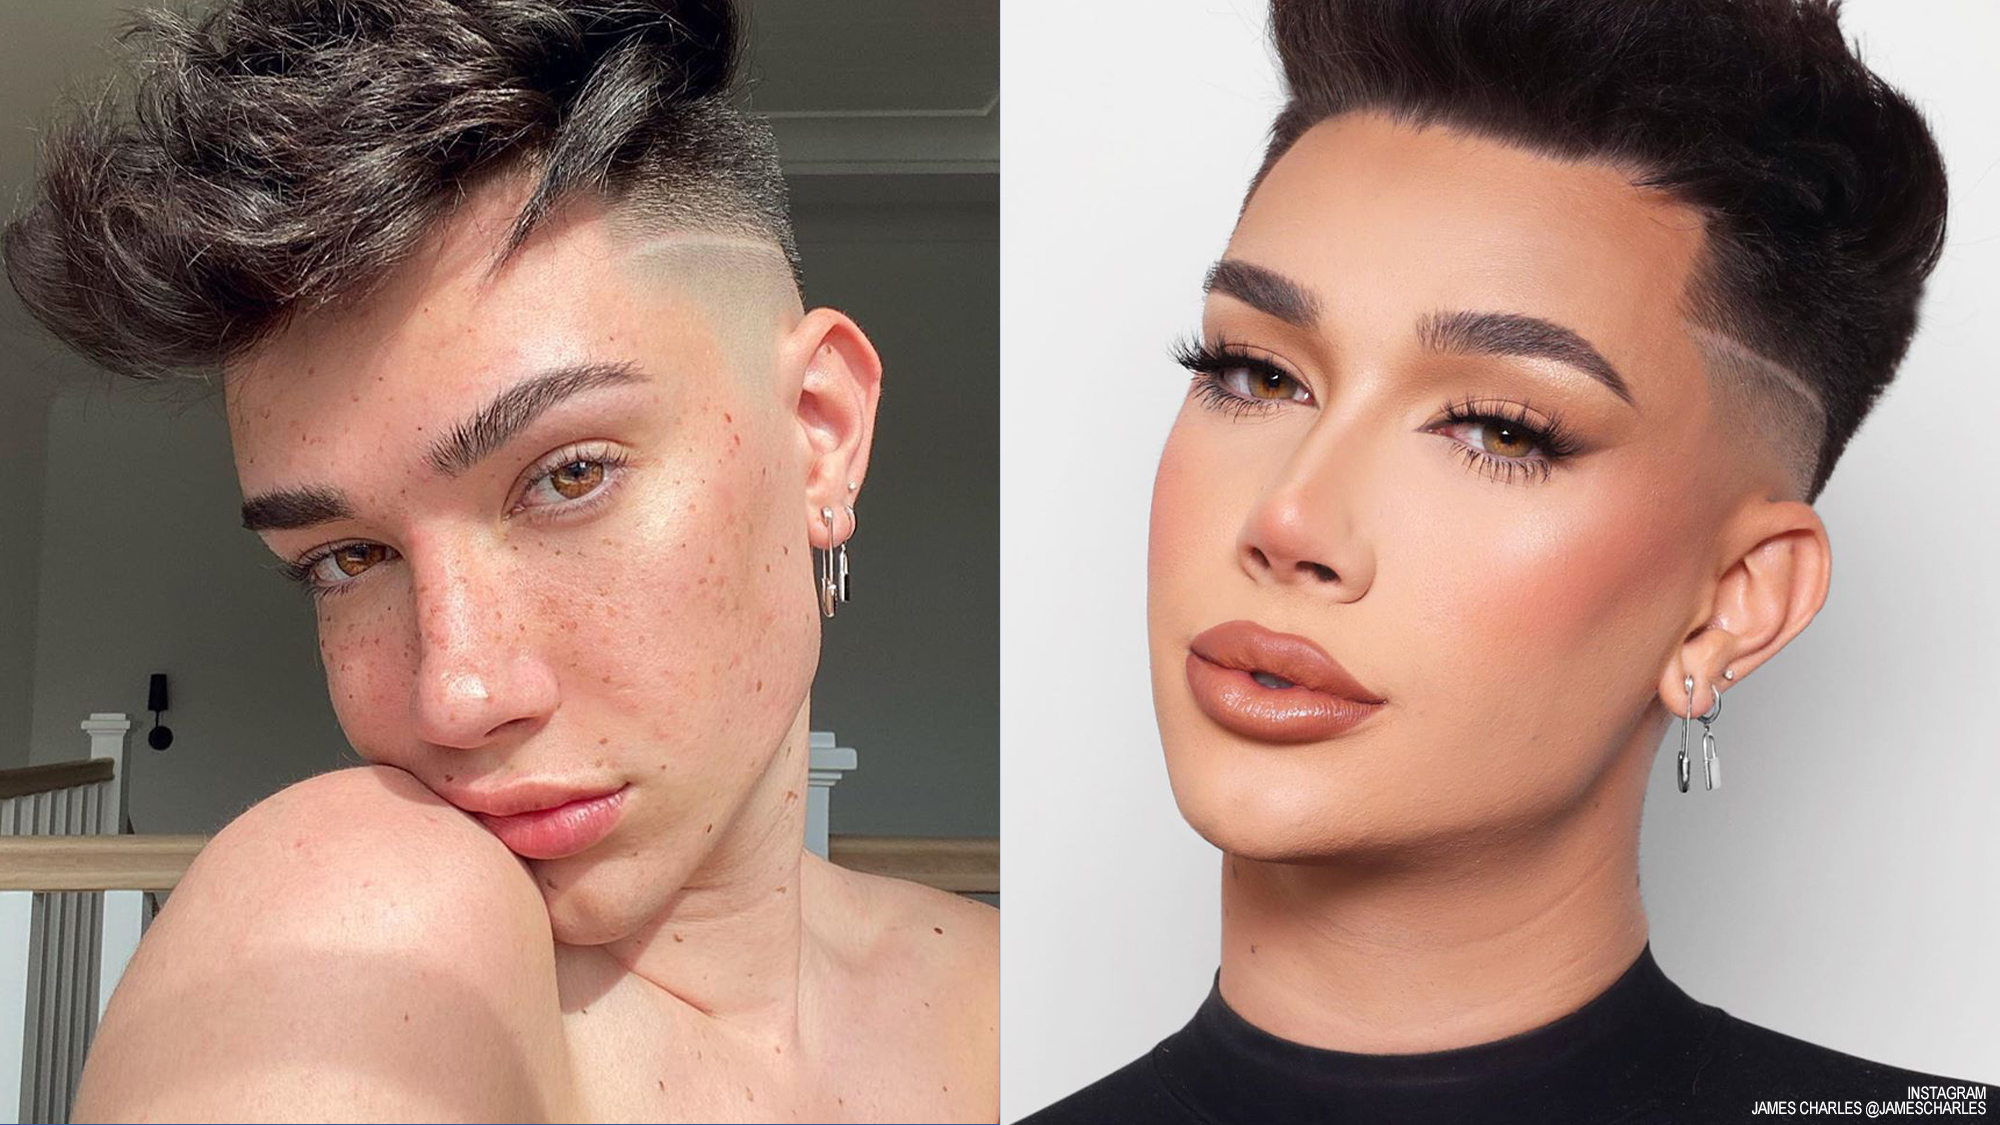 How long is james charles dick